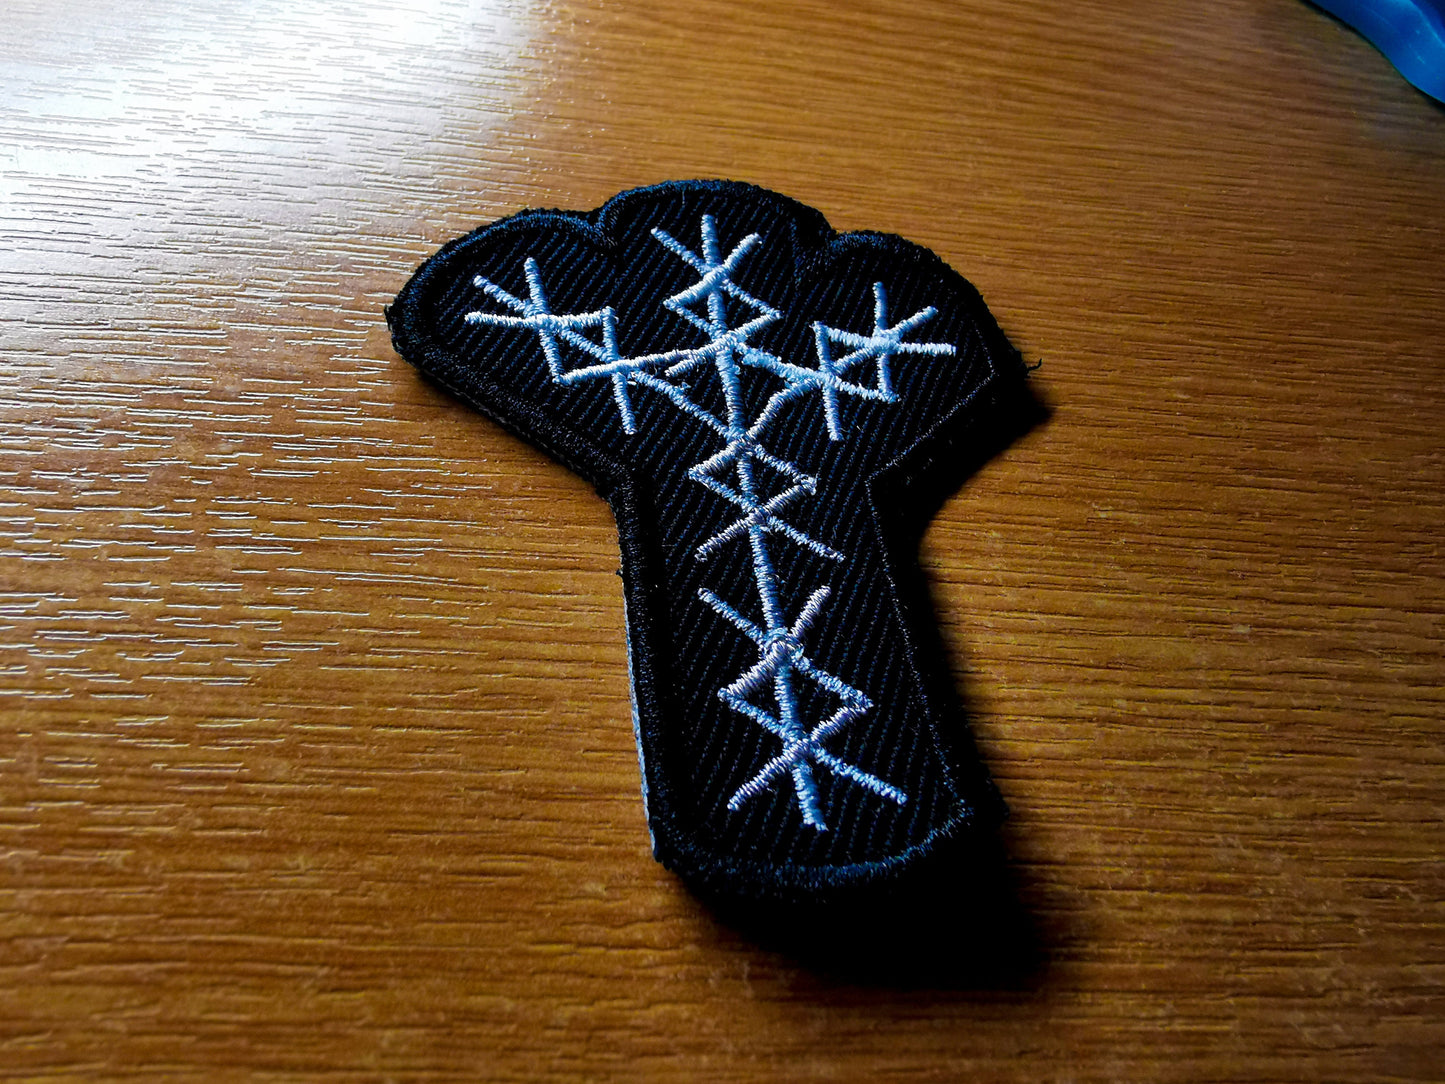 Protection Bindrunes and Algeiz Rune Viking Patch Iron On Embroidered Norse Heathenry Bind Runes